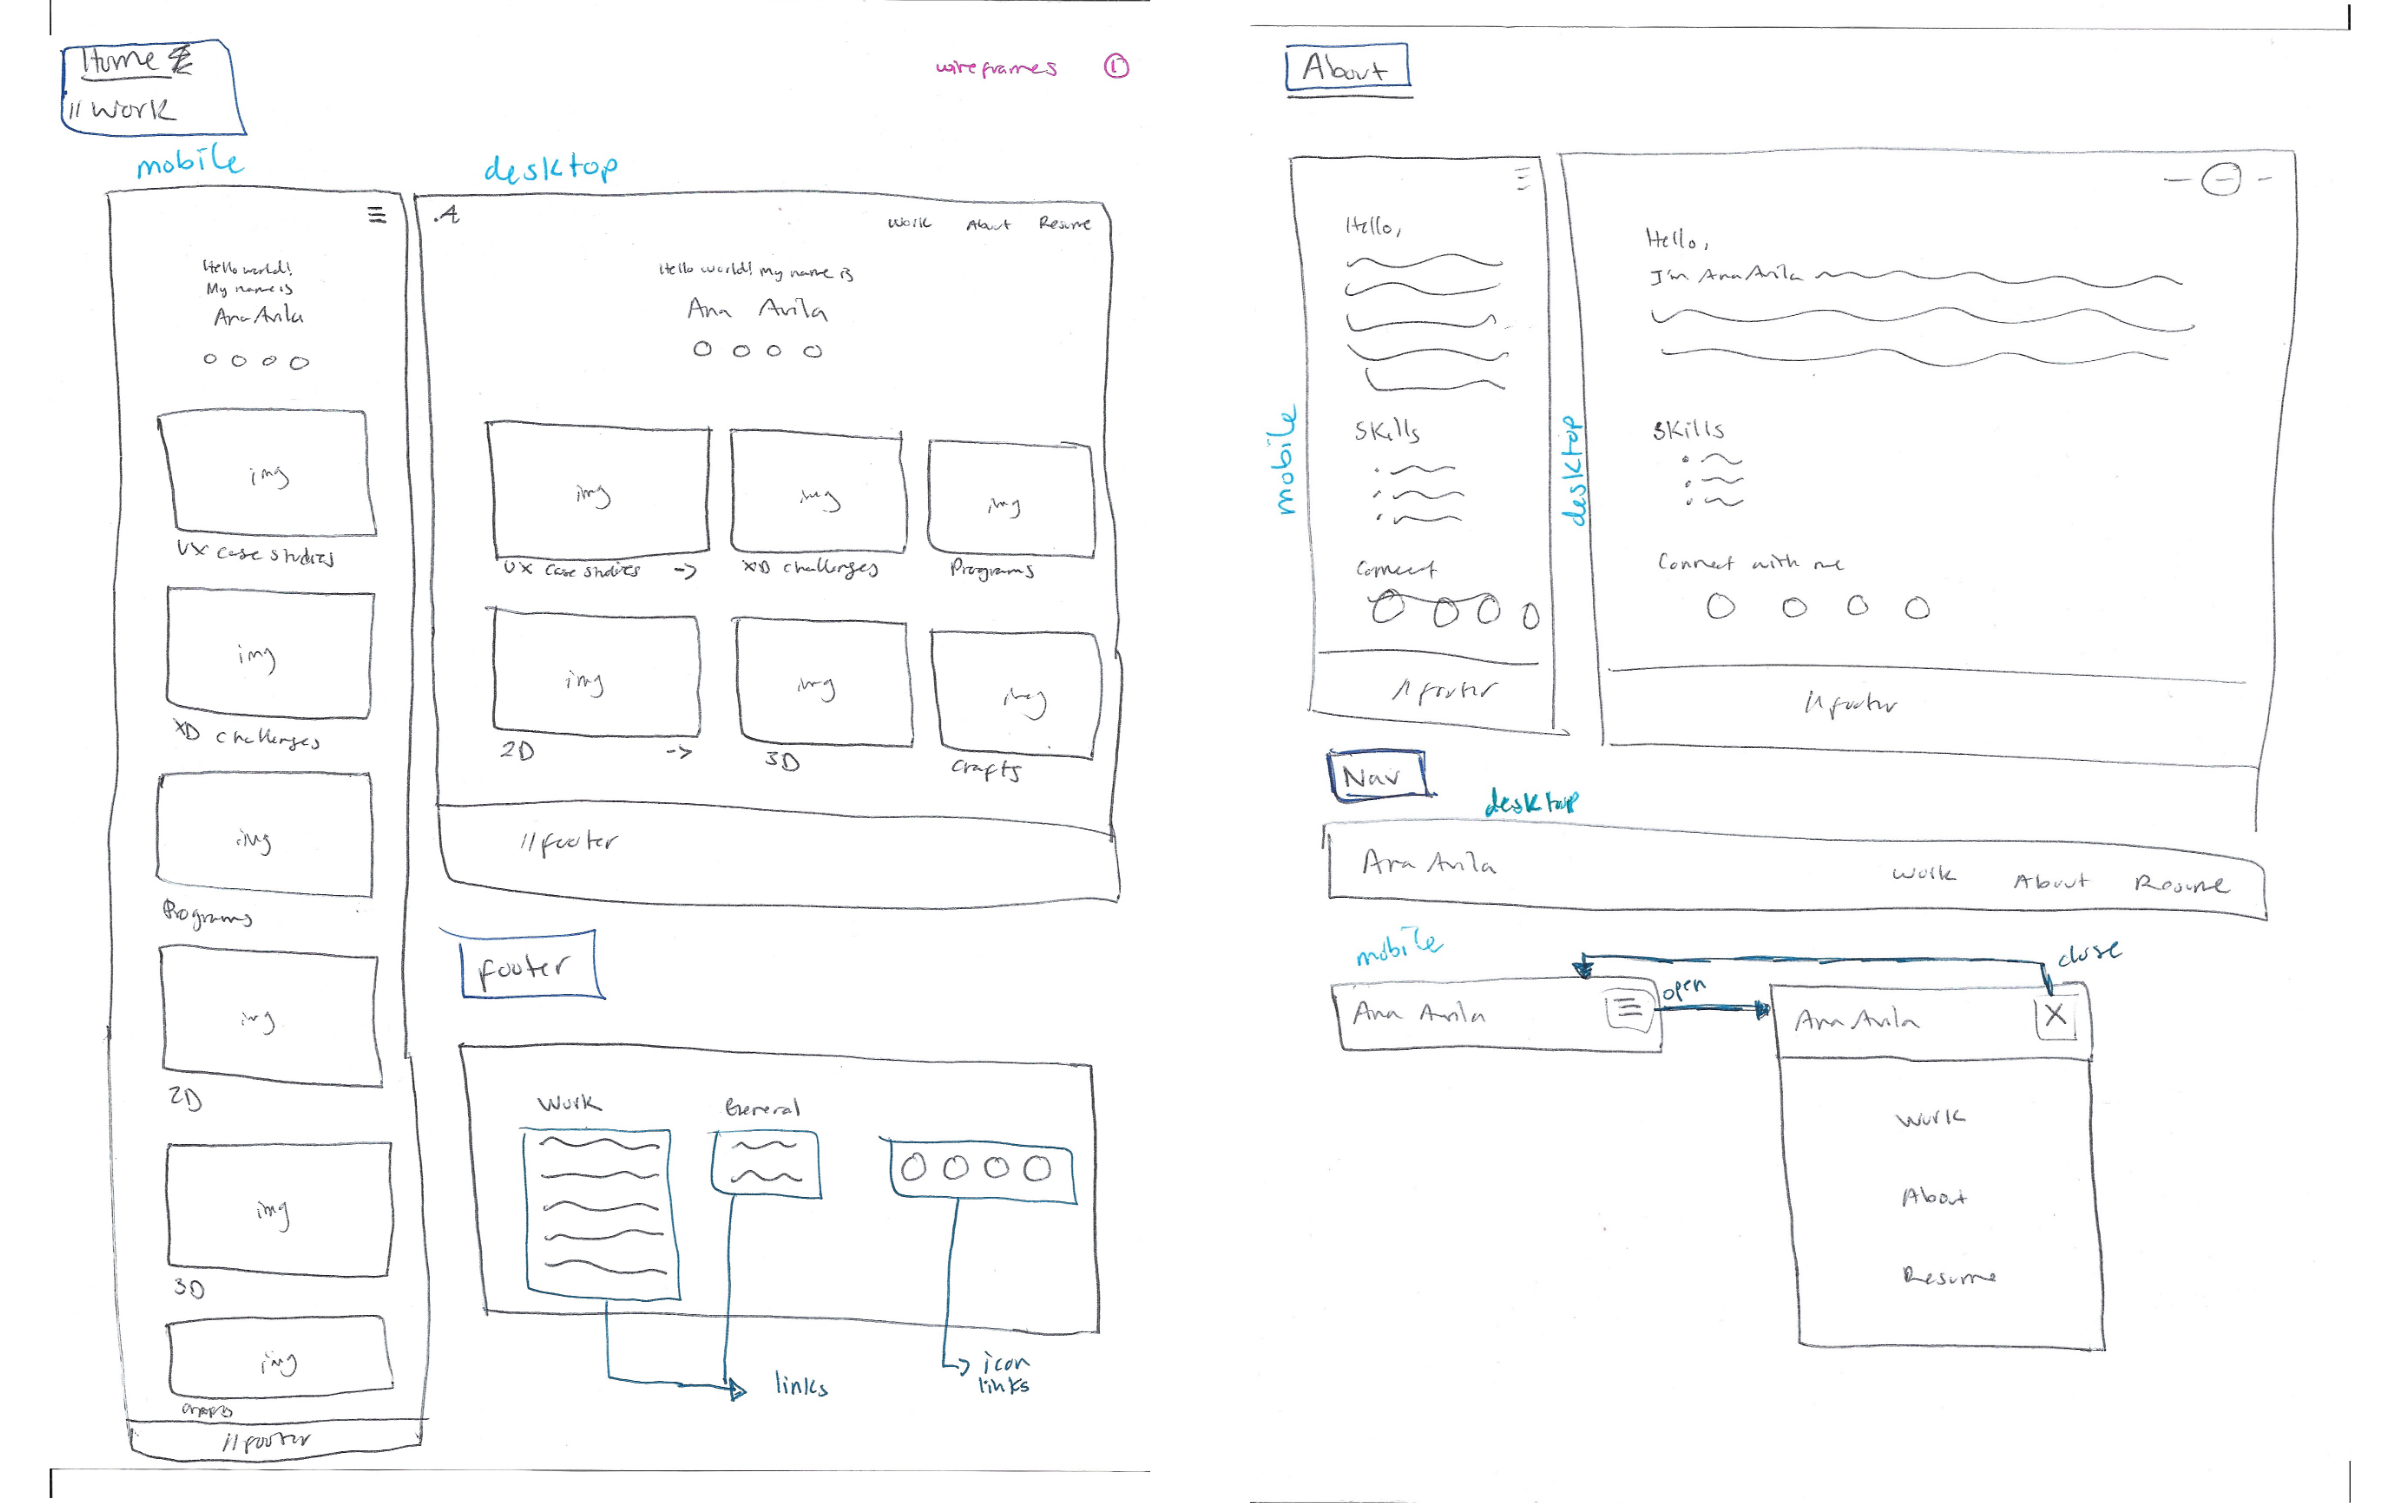 Pen and paper wireframes.